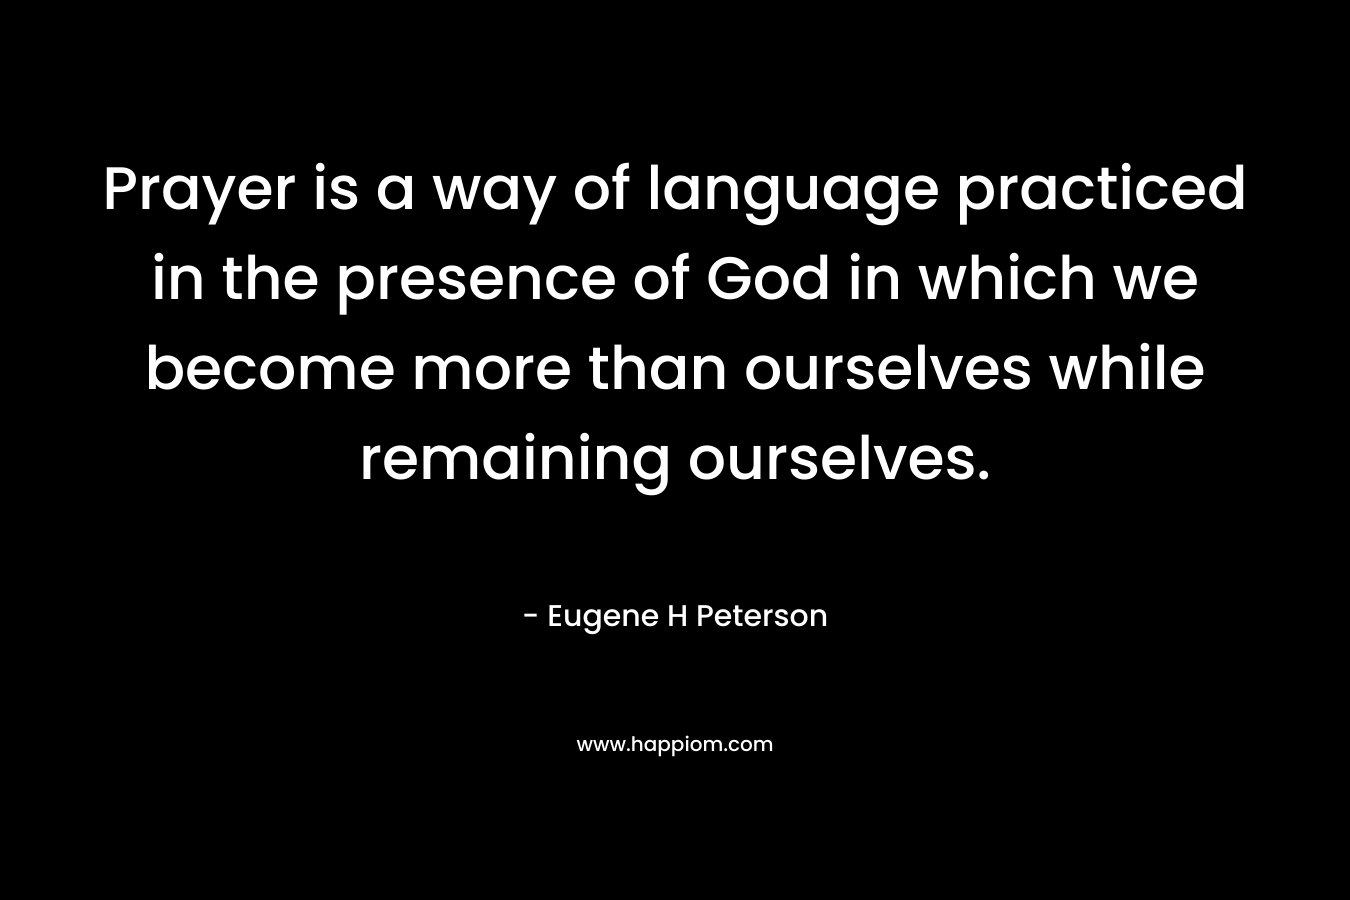 Prayer is a way of language practiced in the presence of God in which we become more than ourselves while remaining ourselves. – Eugene H Peterson